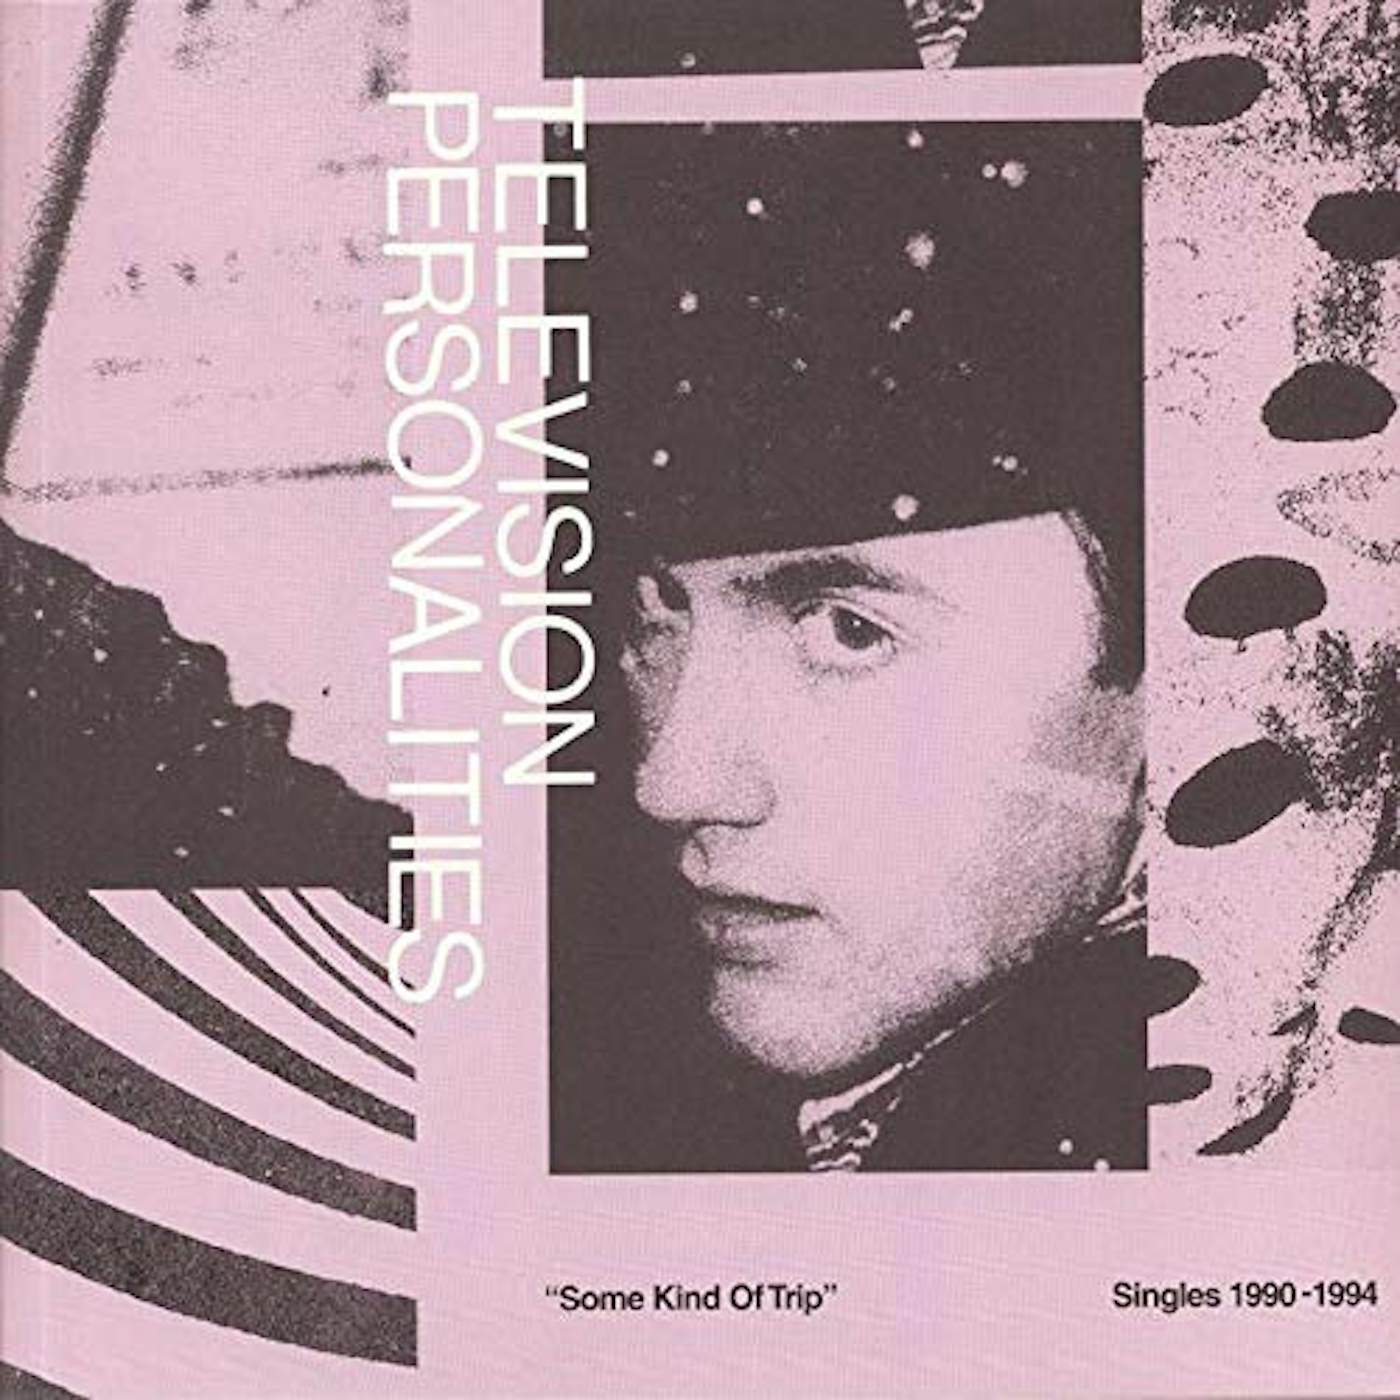 Television Personalities Some Kind Of Trip: Singles 1990-1994 Vinyl Record